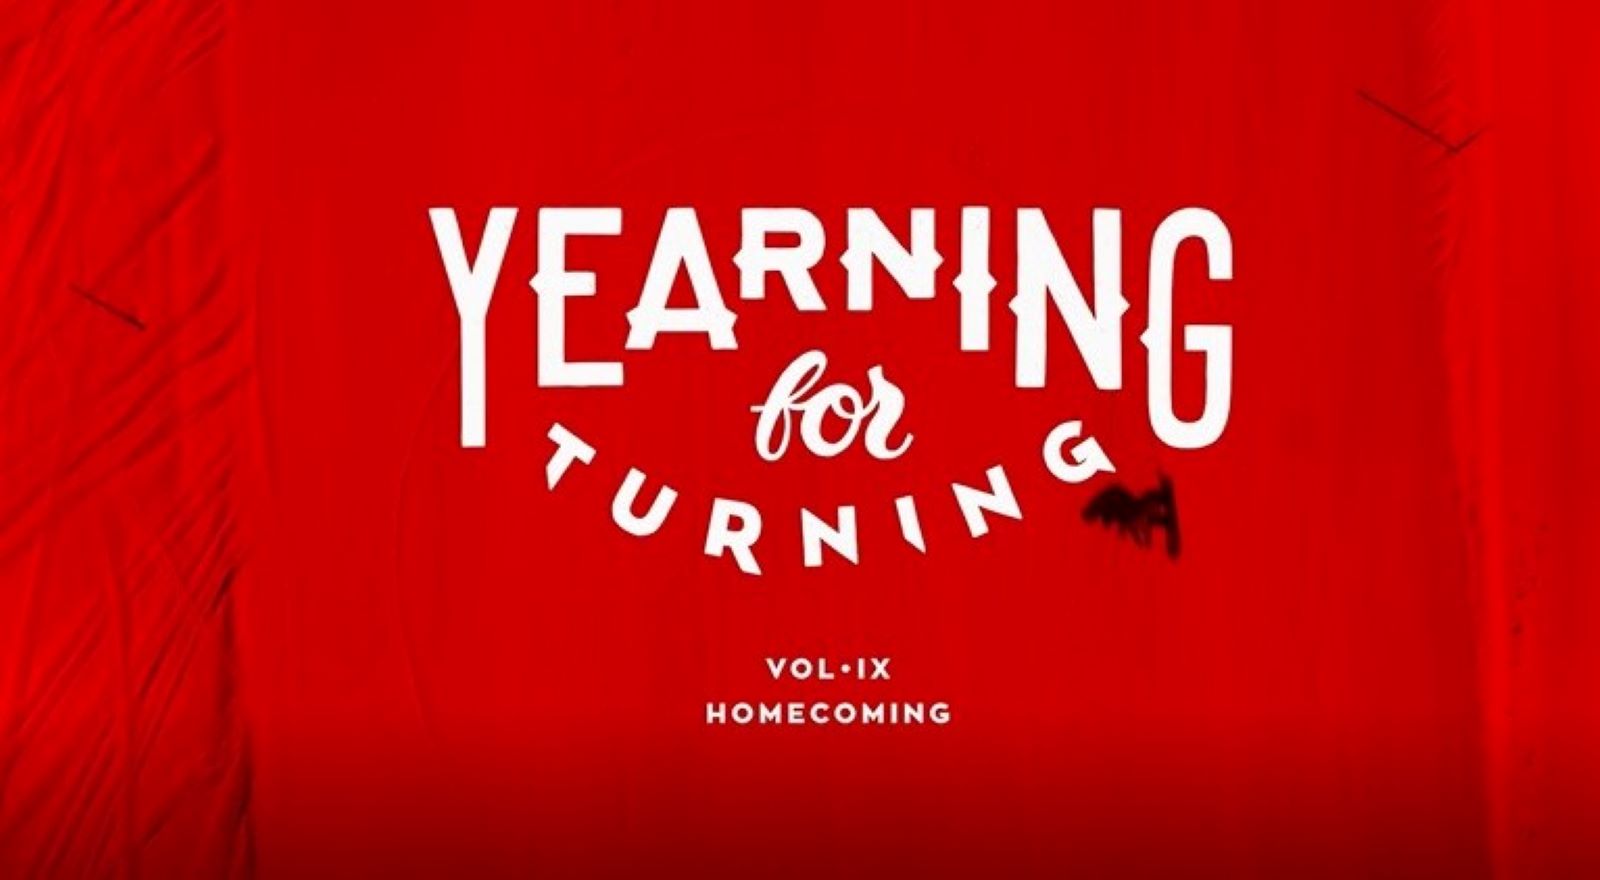 Yearning For Turning vol.9